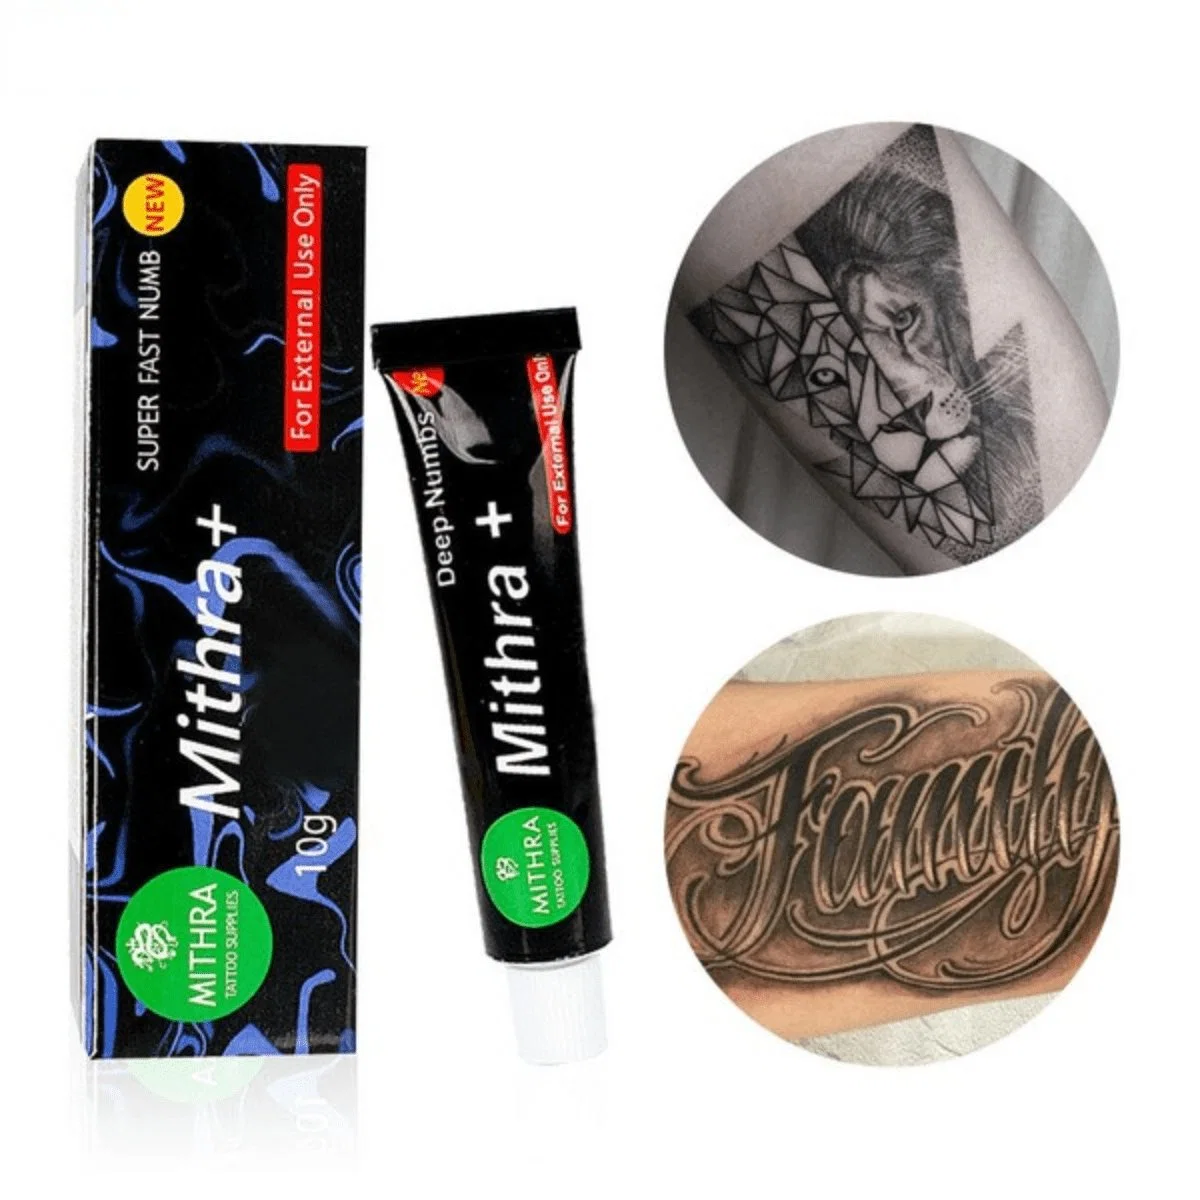 Factory OEM Mithra Tattoo Fast Numbing Cream Tattoo Body Anesthetic Tattooing/Piercing/Hair Removal/Eyebrow Makeup Eyebrow Tattoo Supply